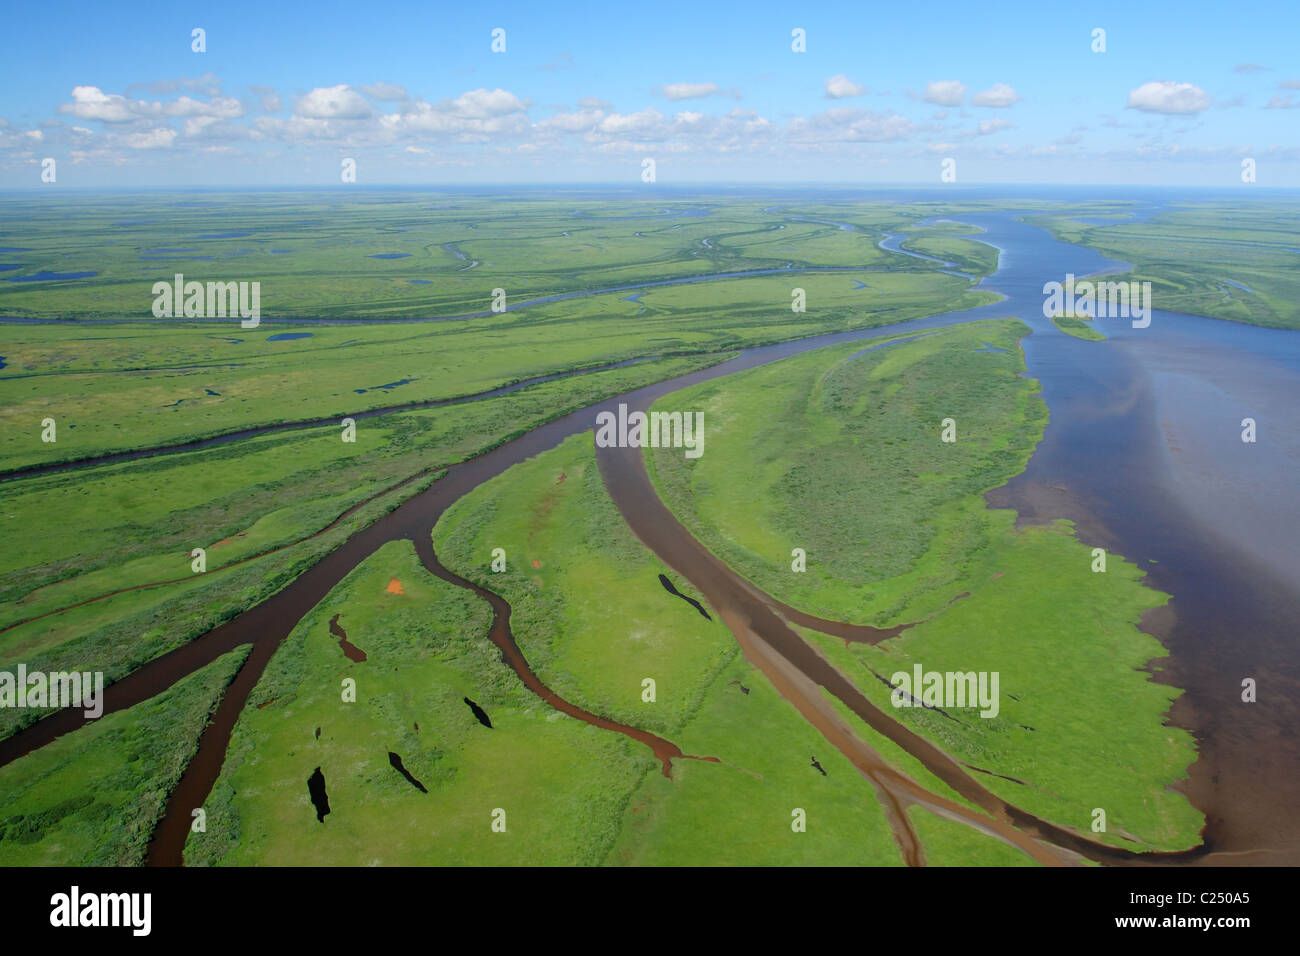 Bayous flowing into the Barents sea. Nenets Autonomous Okrug, Arkhangelsk Oblast, Russia, an aerial view in the summer. Stock Photo